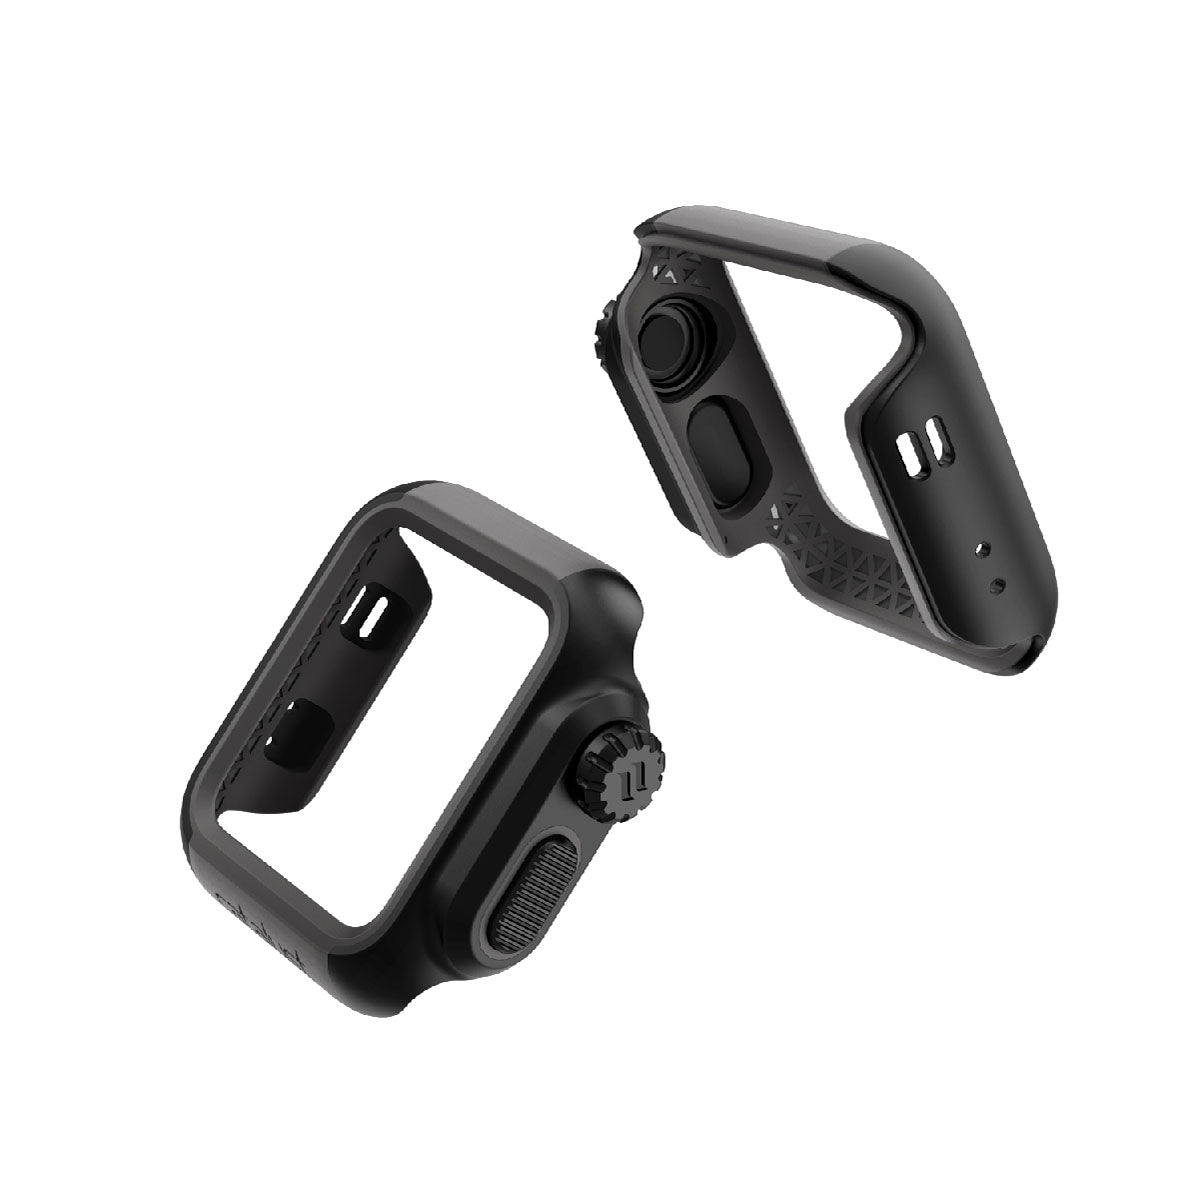 catalyst apple watch series 3 2 38mm impact protection case views of all the sides of the impact protection case black and space gray